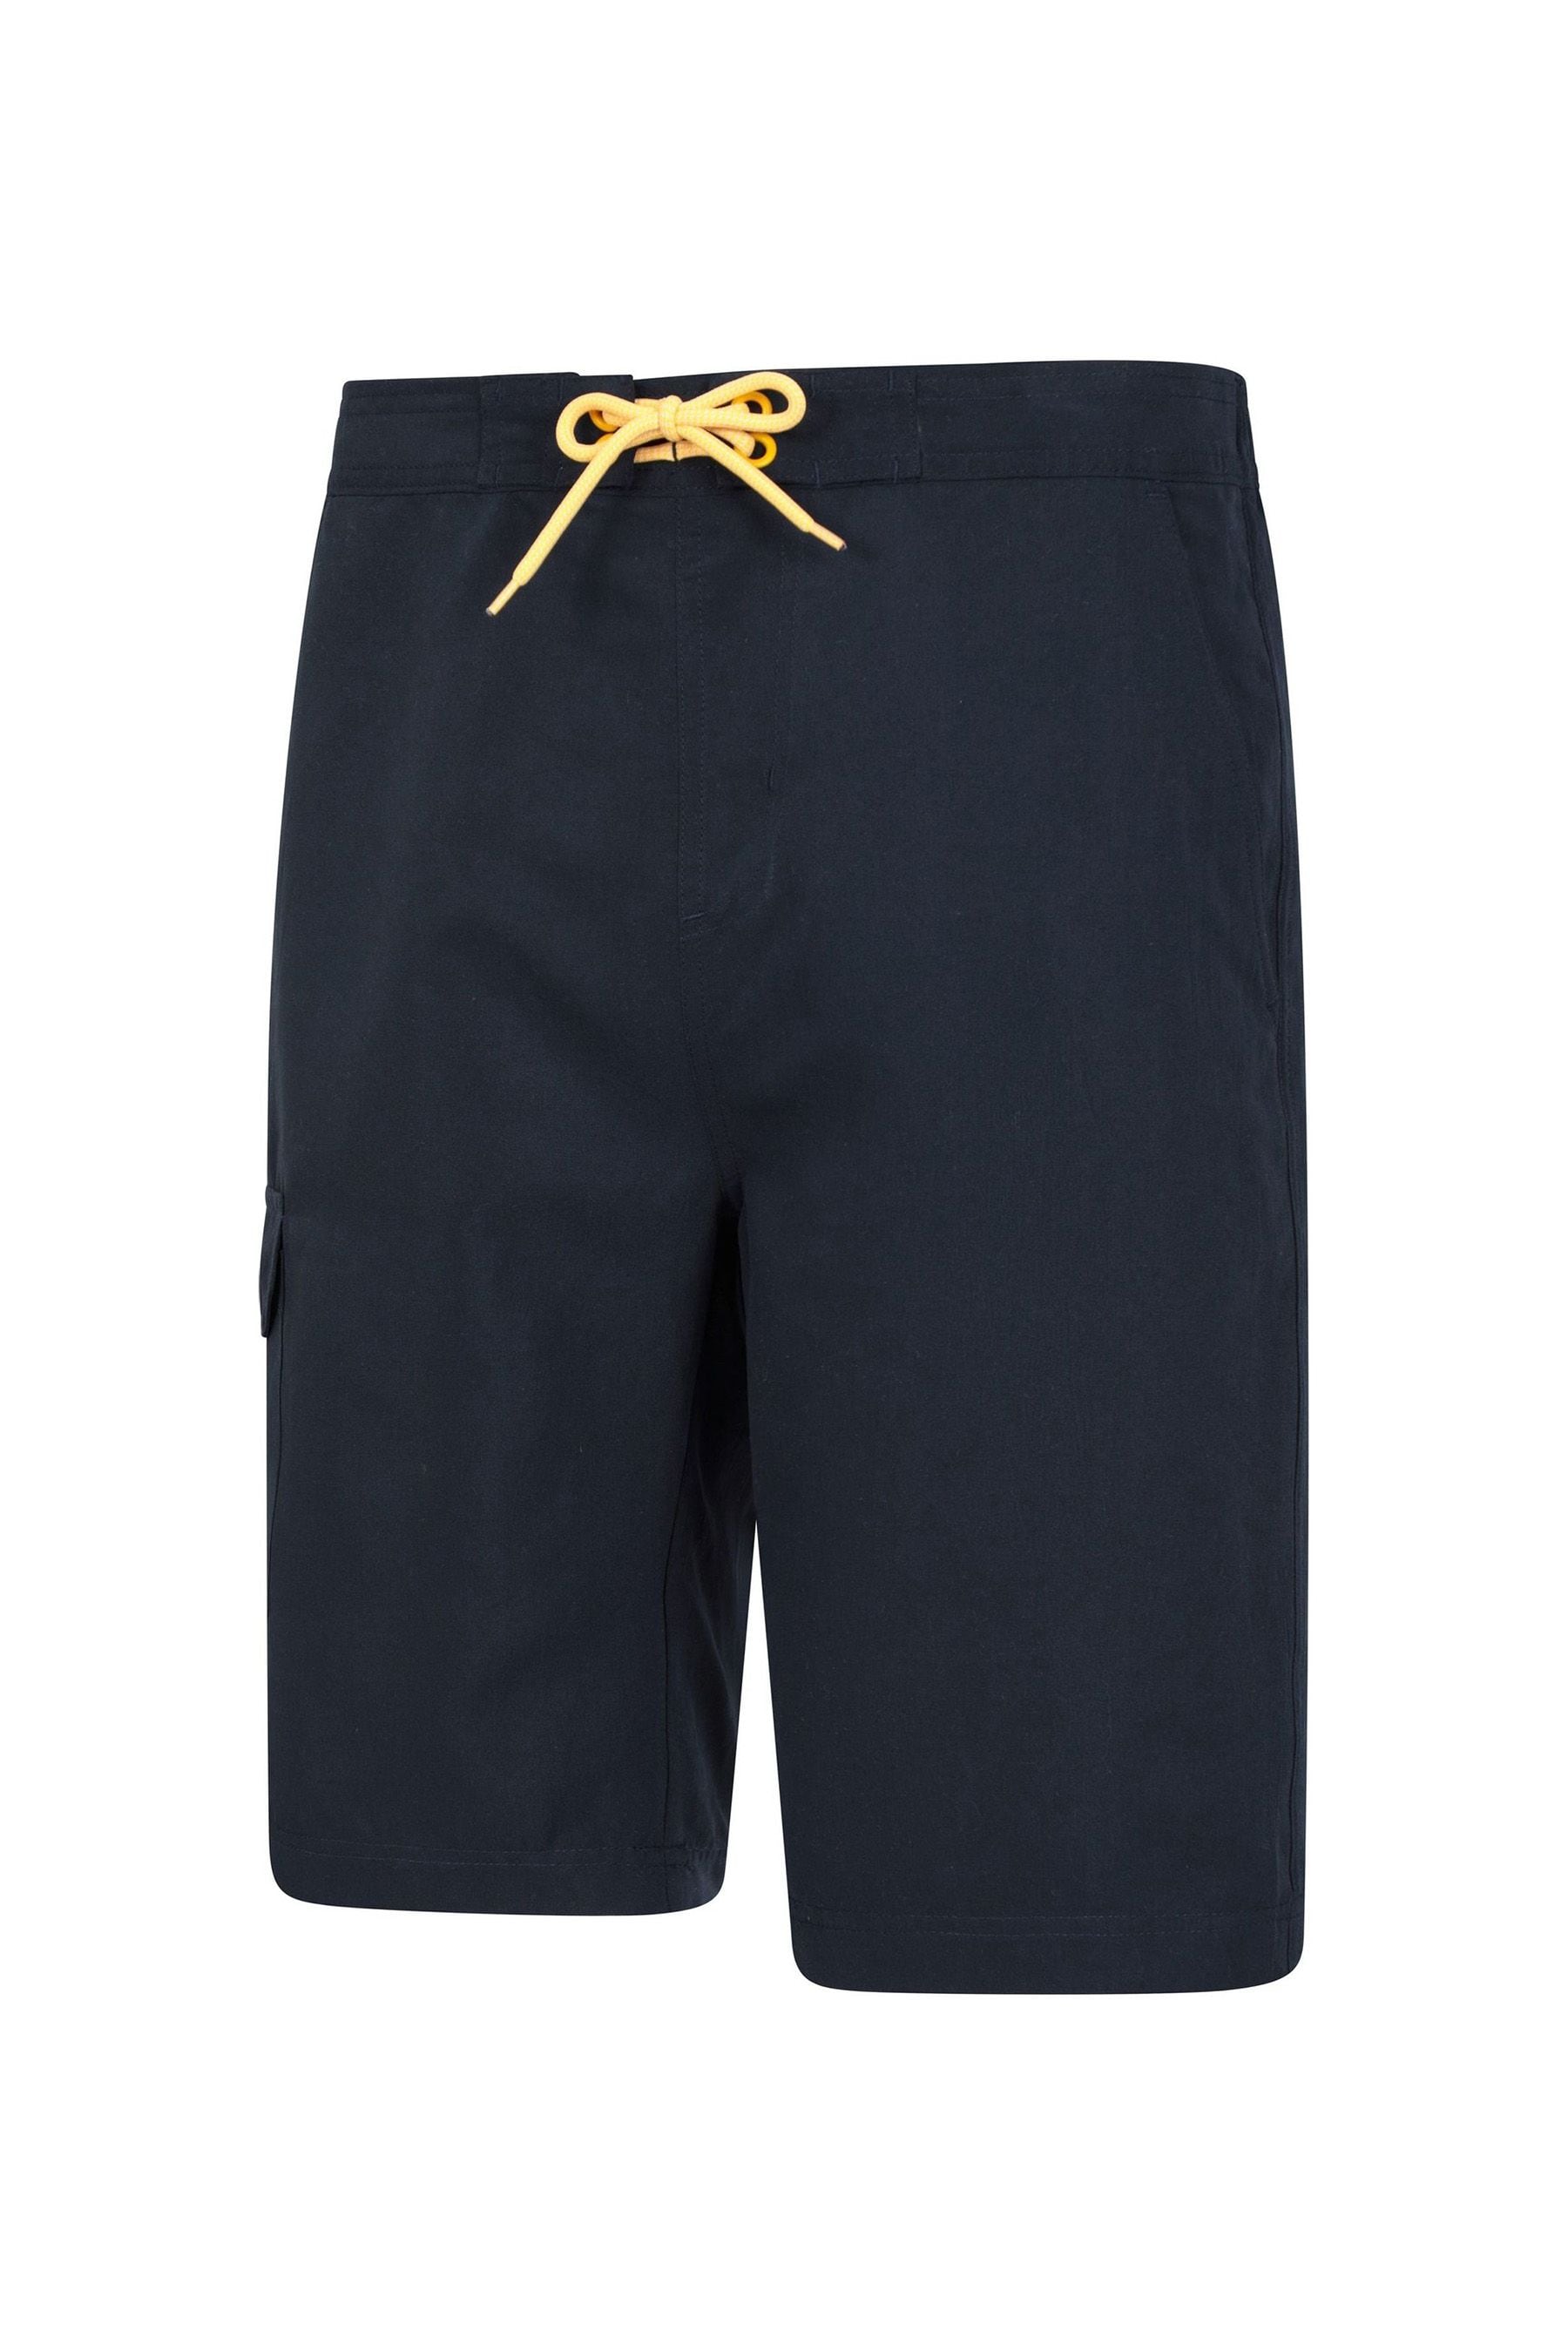 Buy Mountain Warehouse Ocean Boardshorts - Mens from the Next UK online ...